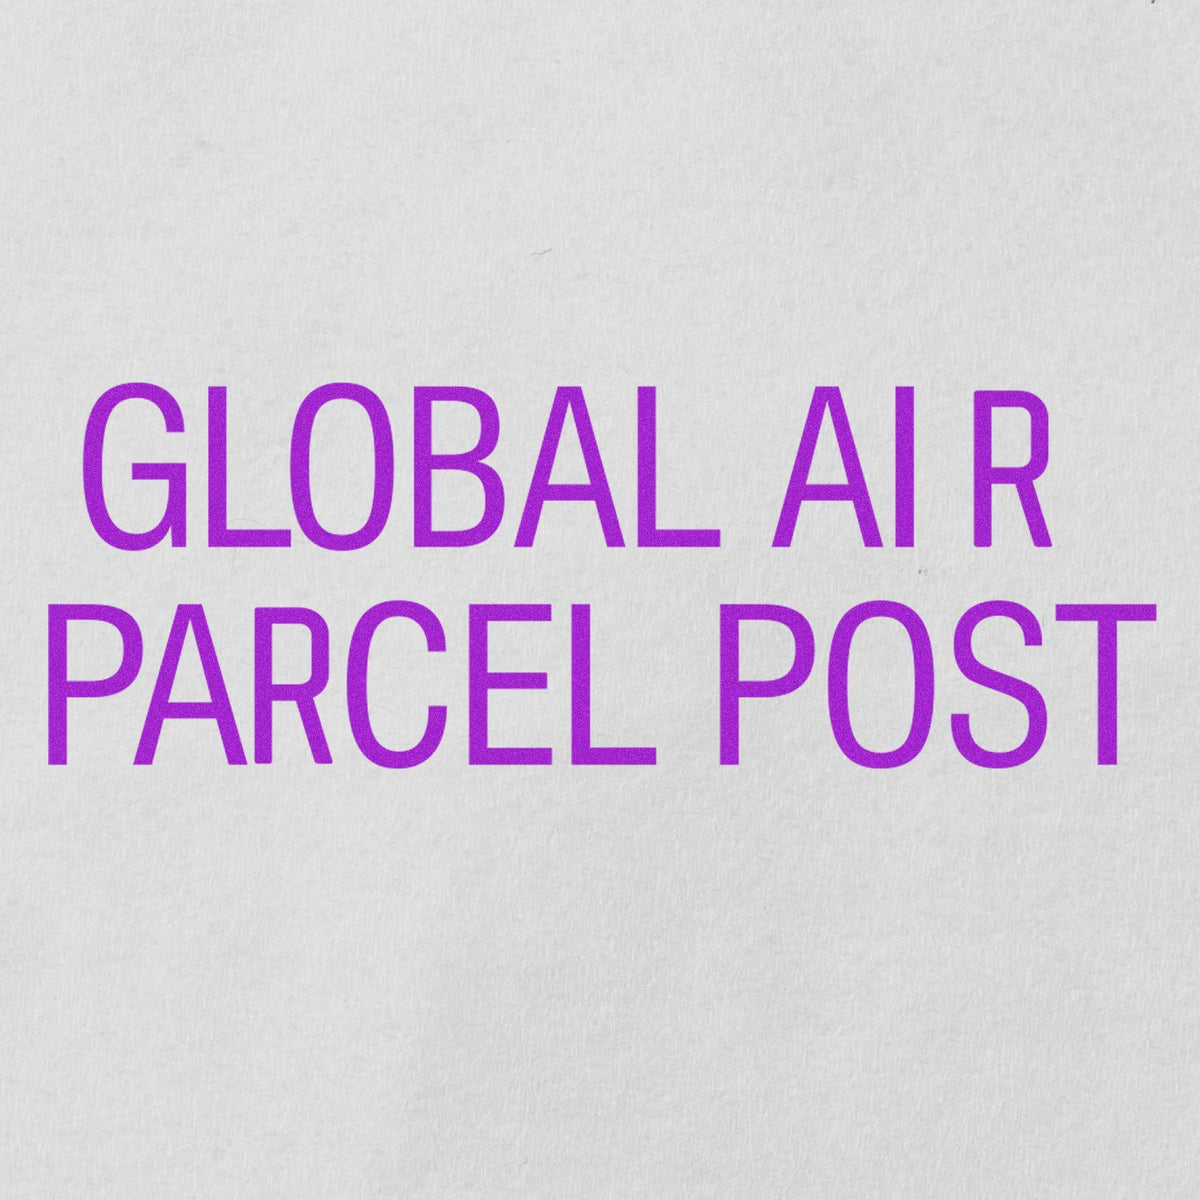 Large Global Air Parcel Post Rubber Stamp In Use